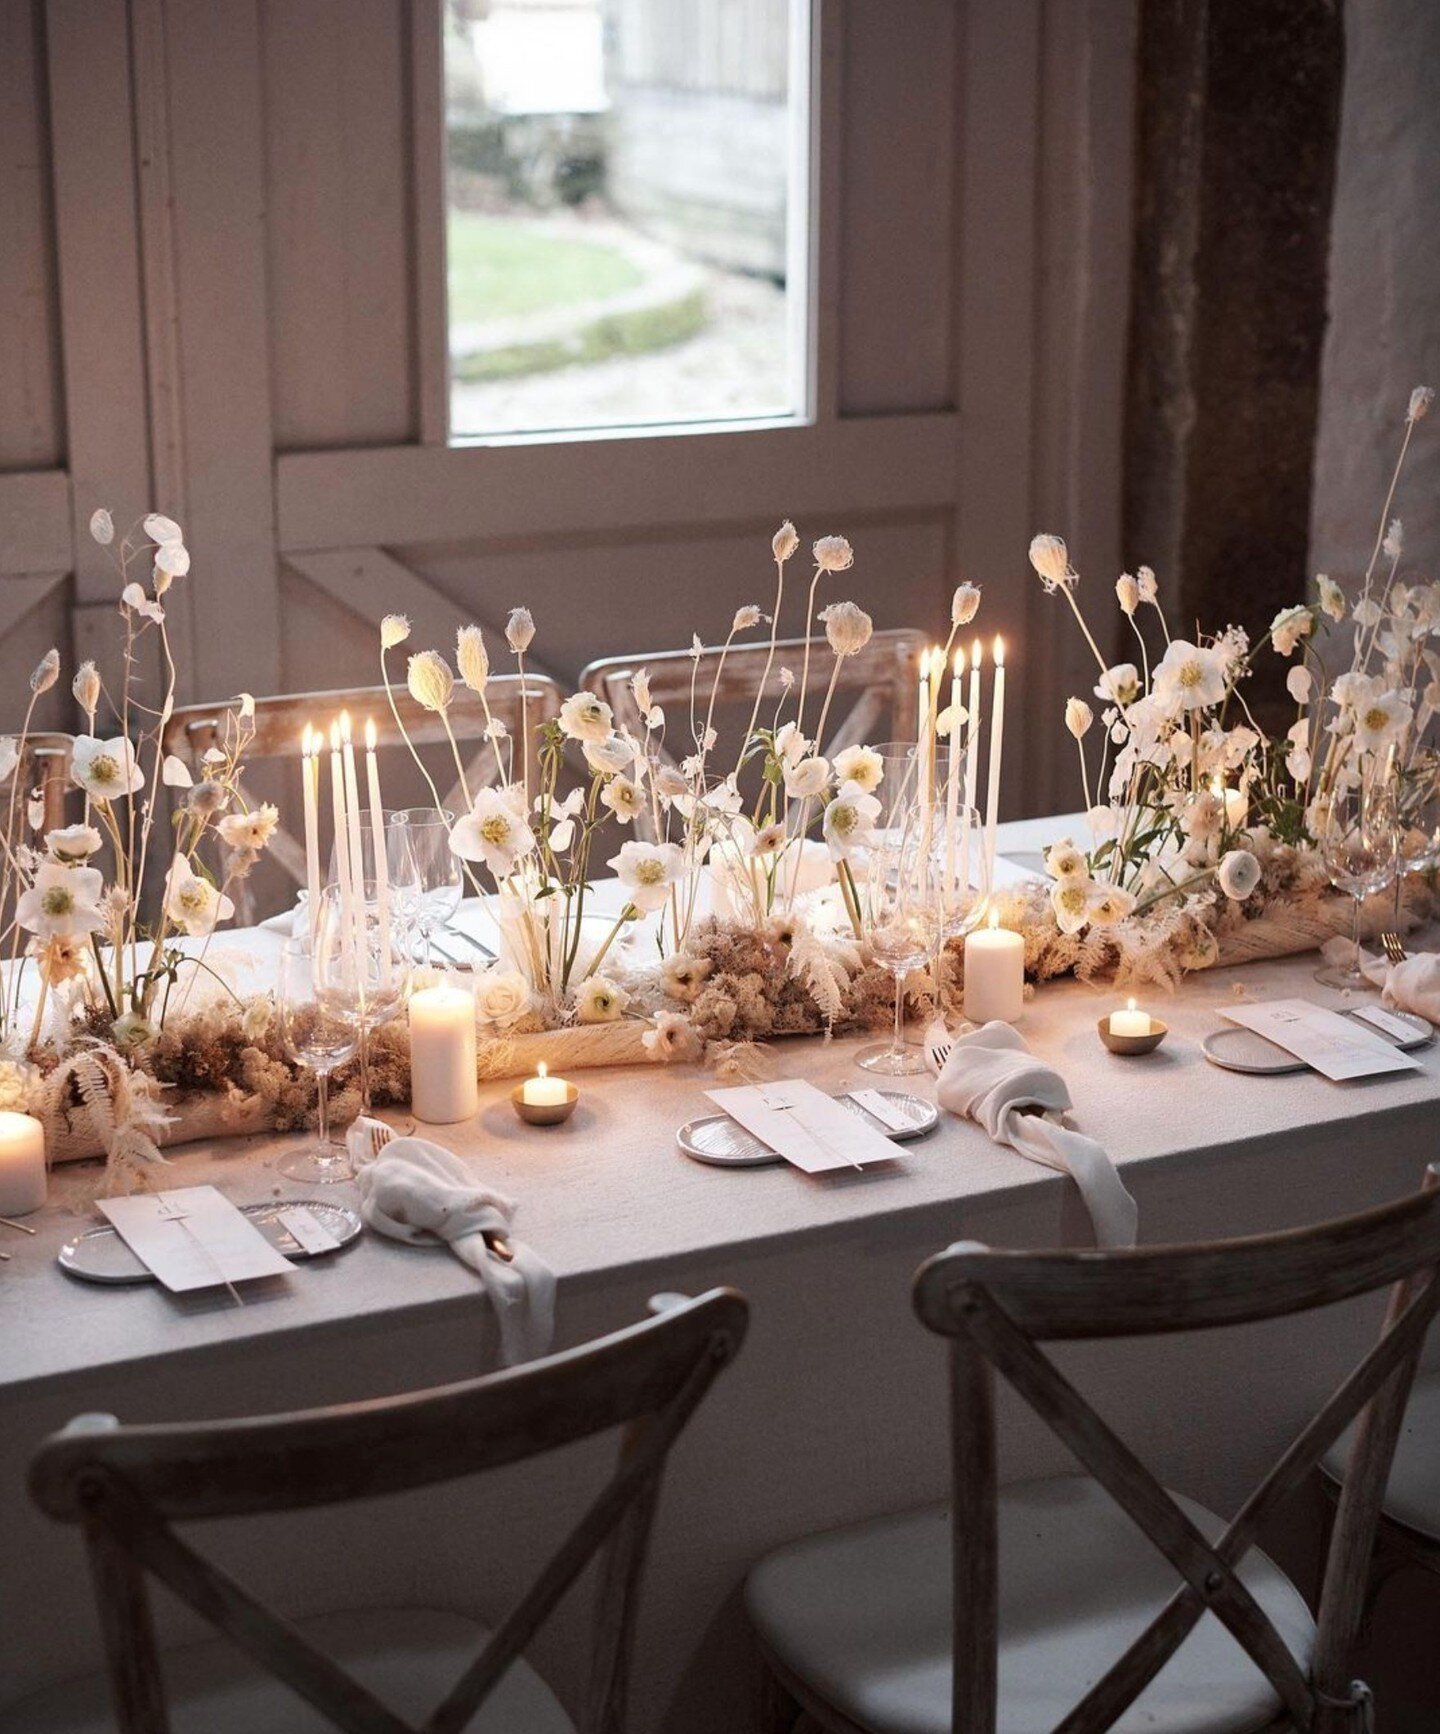 Winter white styling details 🤍⚪🐚🕊️☁️

White on white is going to be big at weddings in 2023. We just love the festive feel of these inspiring looks. 

📸 1. @sassflower @nicoandtate @wyresdaleweddings  @l27weddings @lucymcspiritdesign
📸 2. @josep